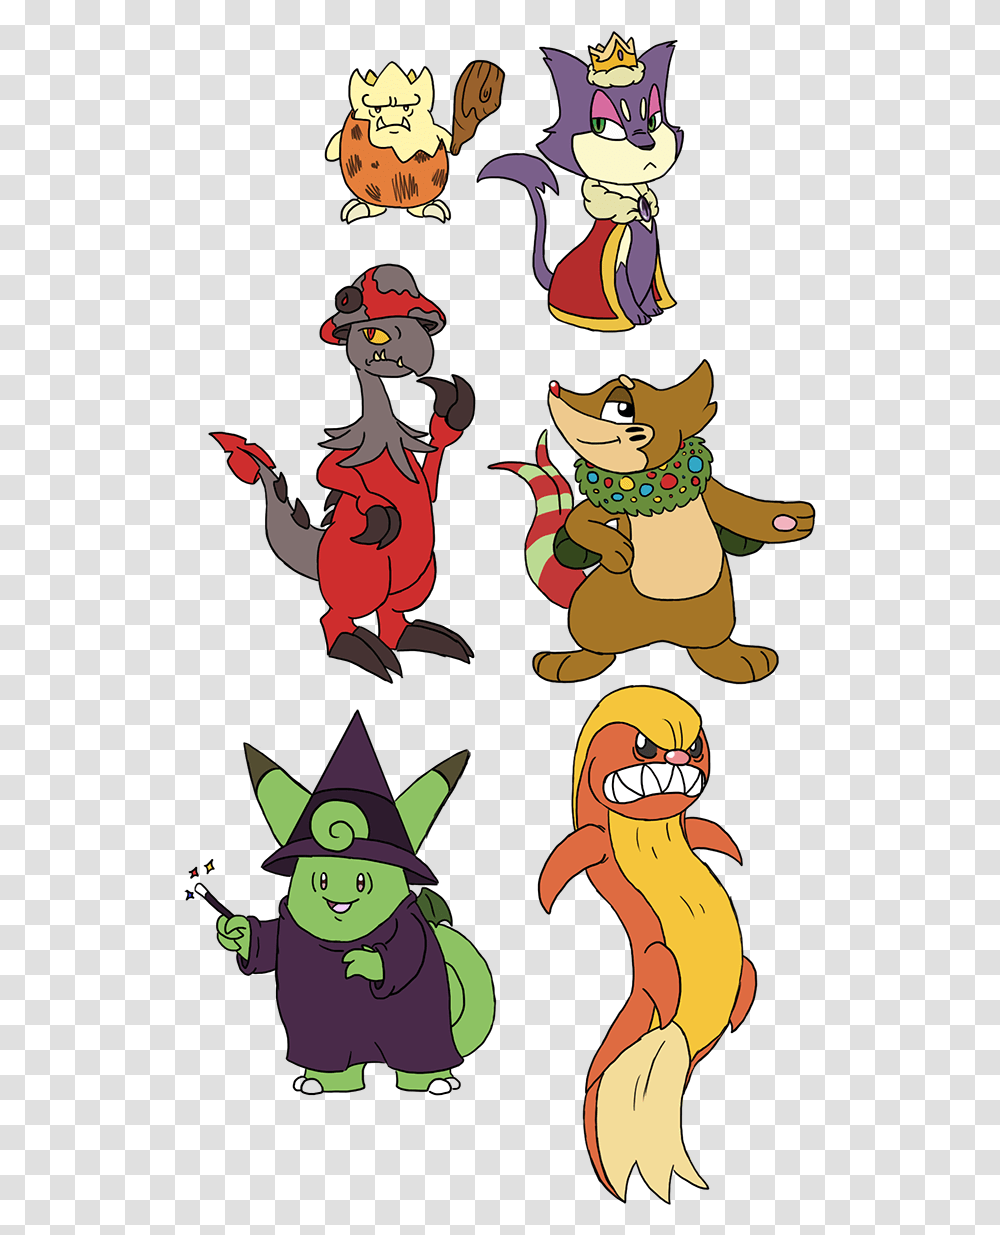 Pokemon Painted As Neopets Sloths Pokemon, Apparel, Poster, Advertisement Transparent Png